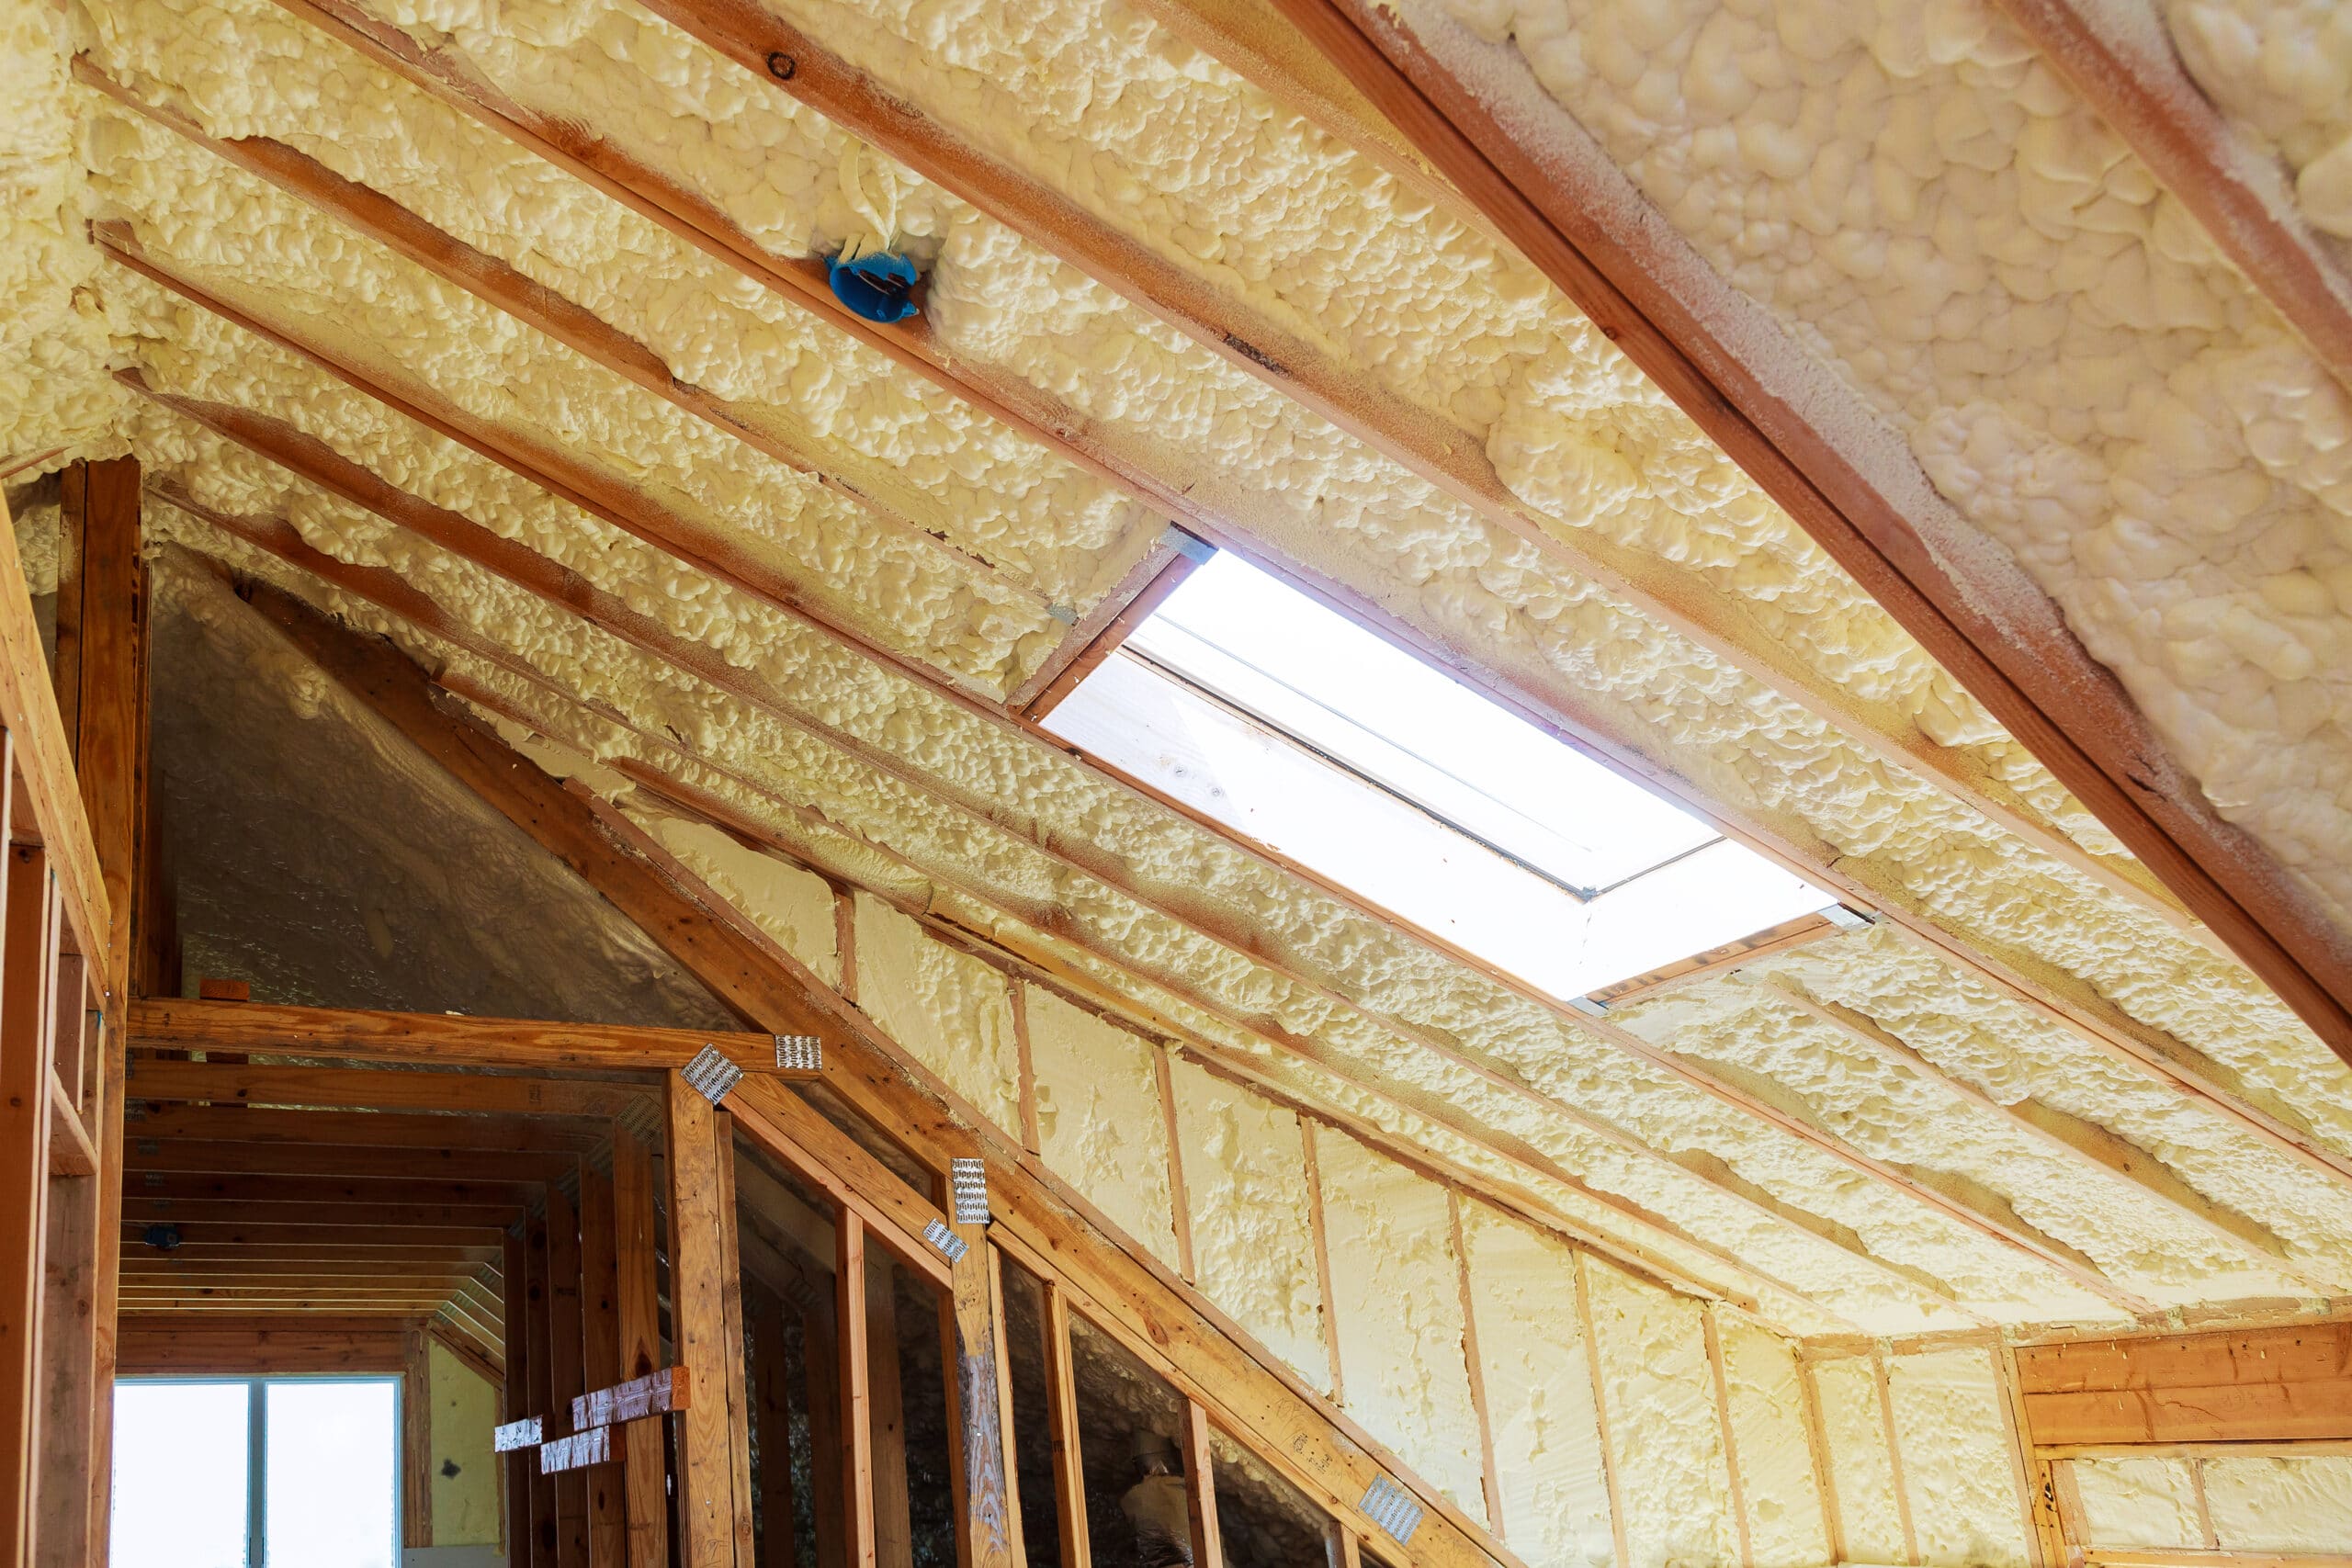 The impact of new construction home insulation R-value to maximize savings and comfort